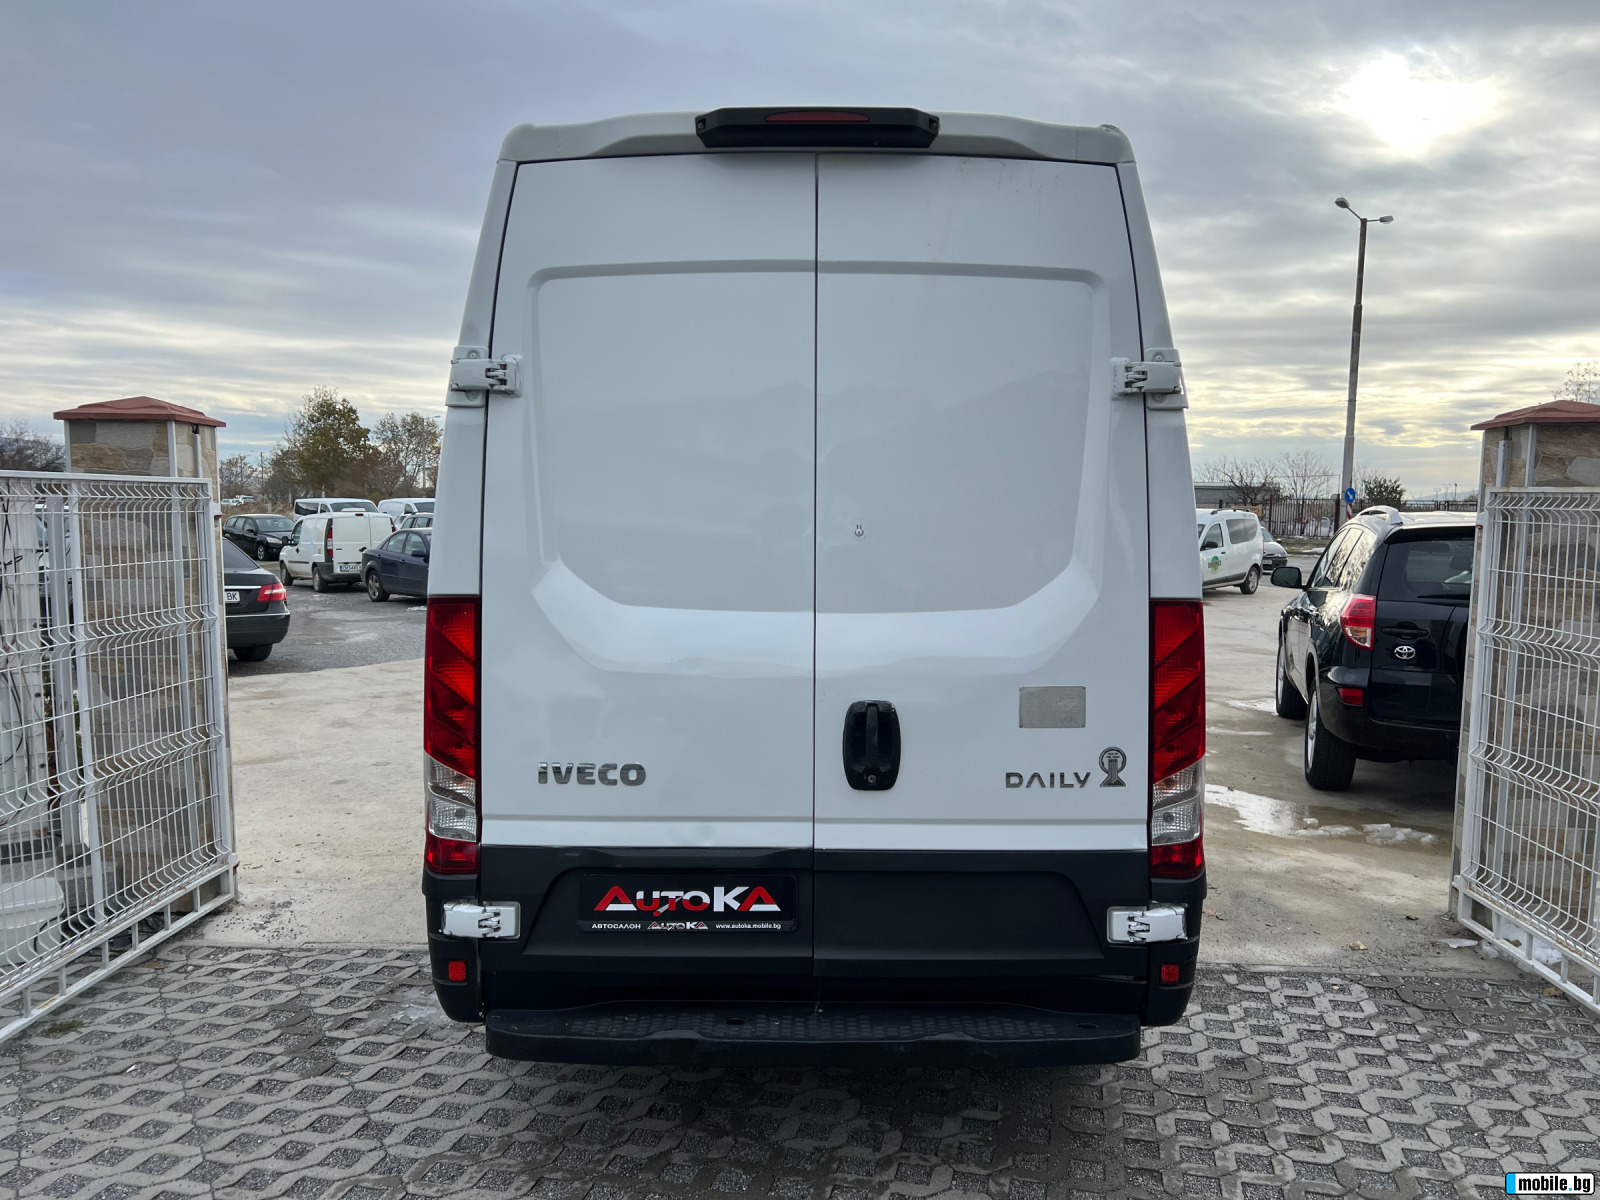 Iveco 35s13 DAILY=  -20+ 30= 6= 2.3HDI-126 | Mobile.bg   4